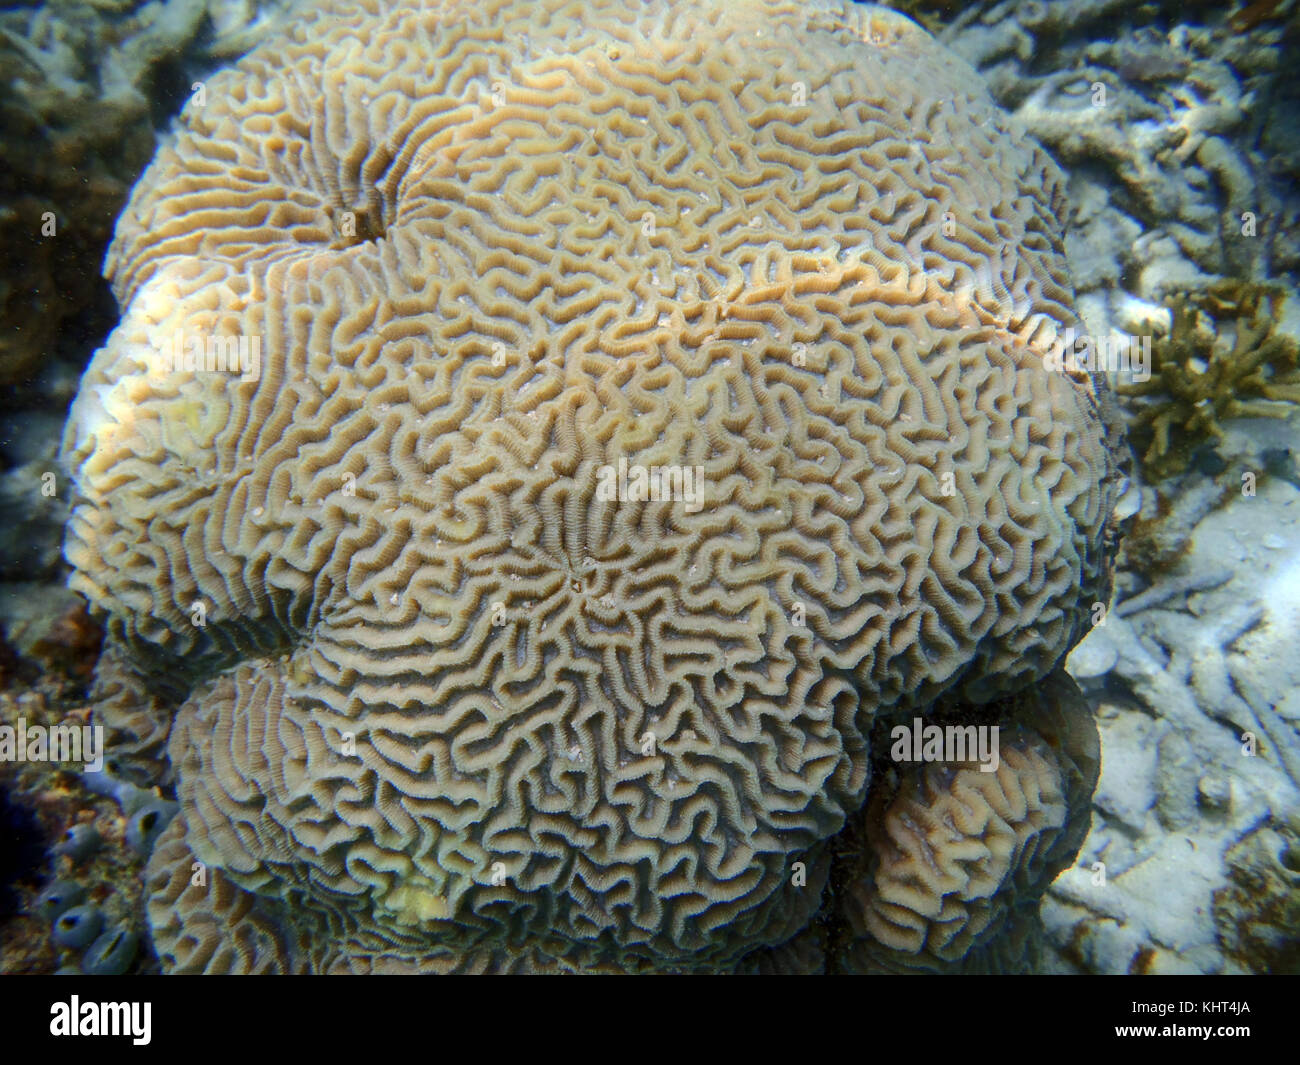 Brain coral close up picture in the sea Stock Photo